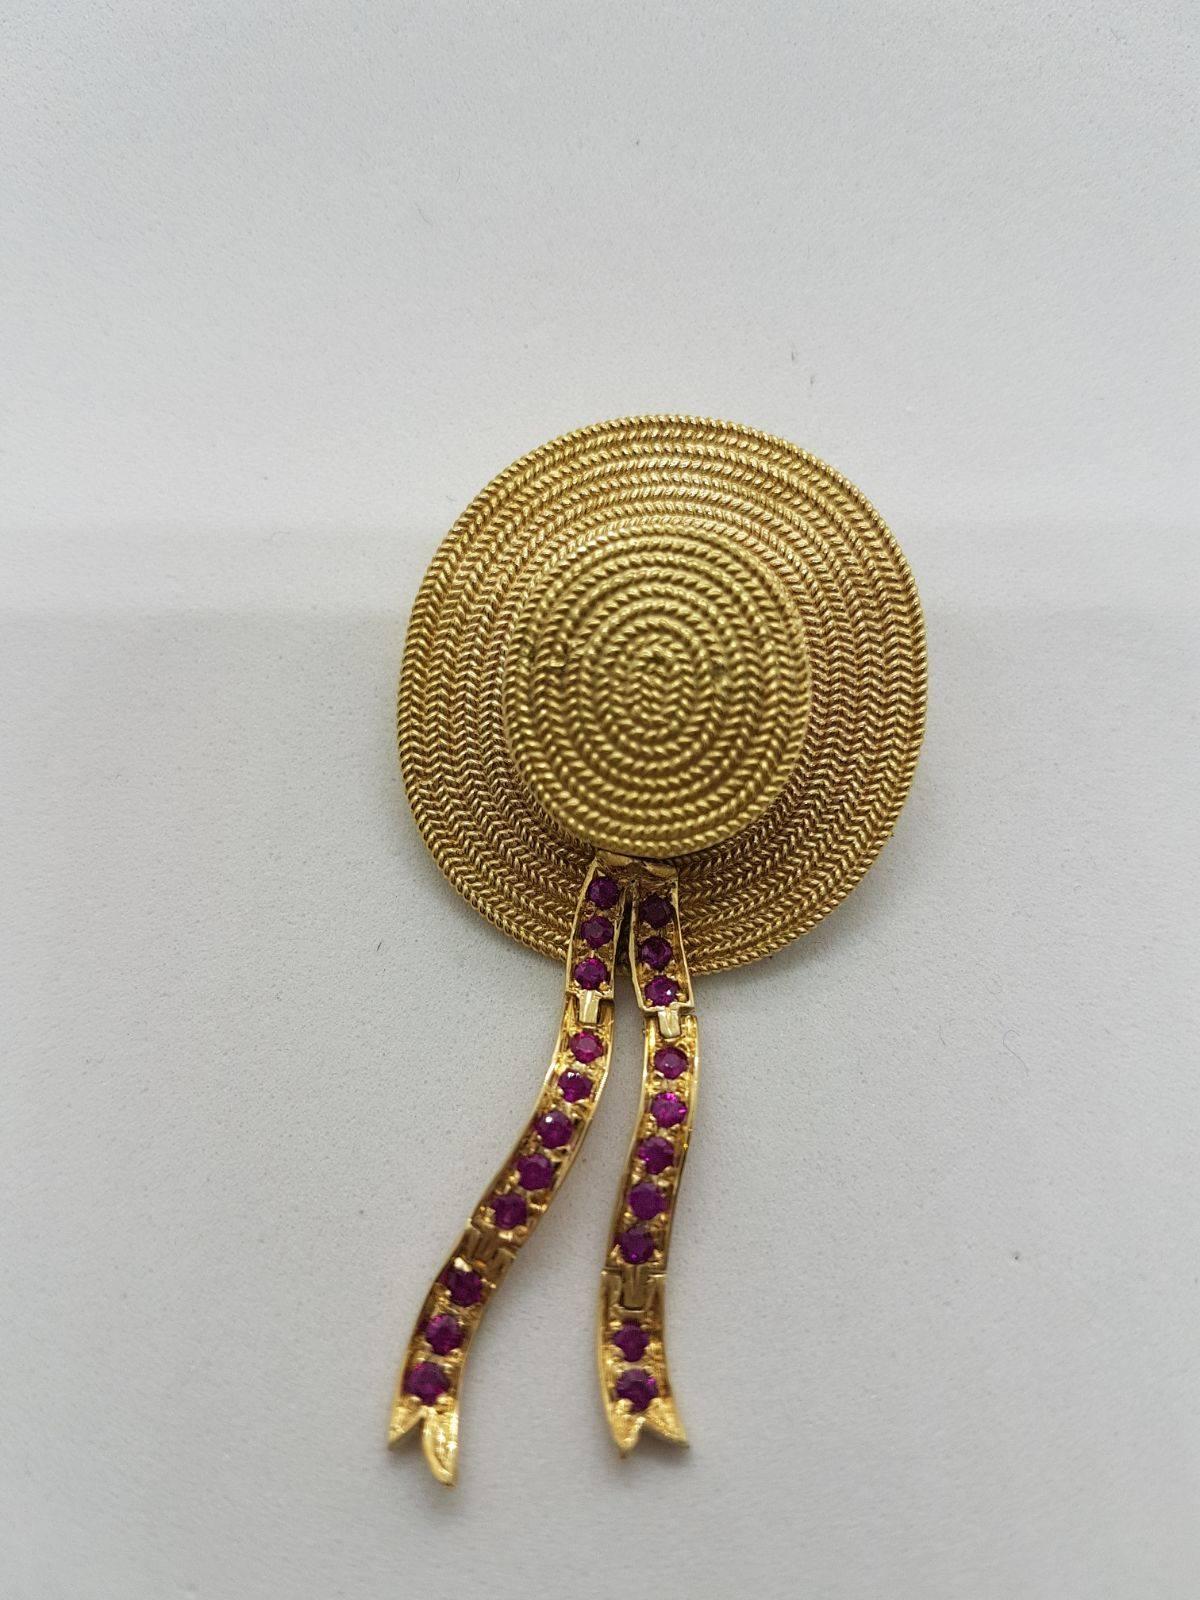 18 Karat Yellow Gold and Rubies Venetian Gondolier Hat Broach and Pendant For Sale 1